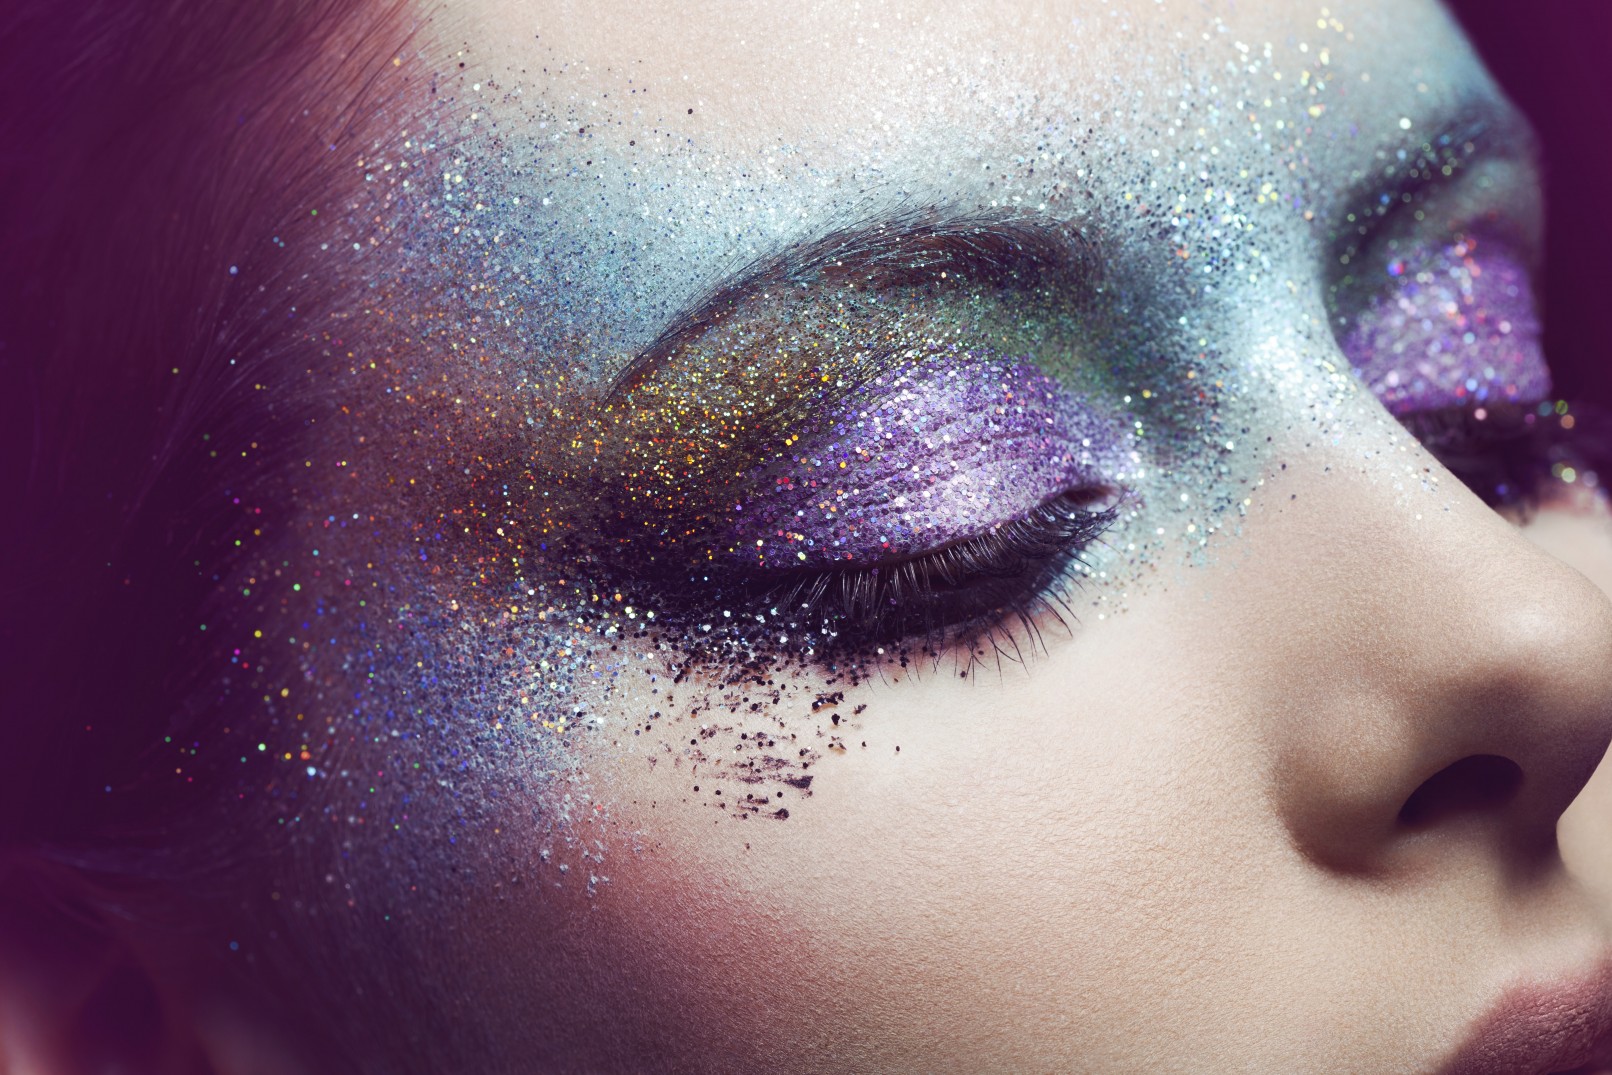 Full of Stars - Photo retouching by Marie-Pier Toutant